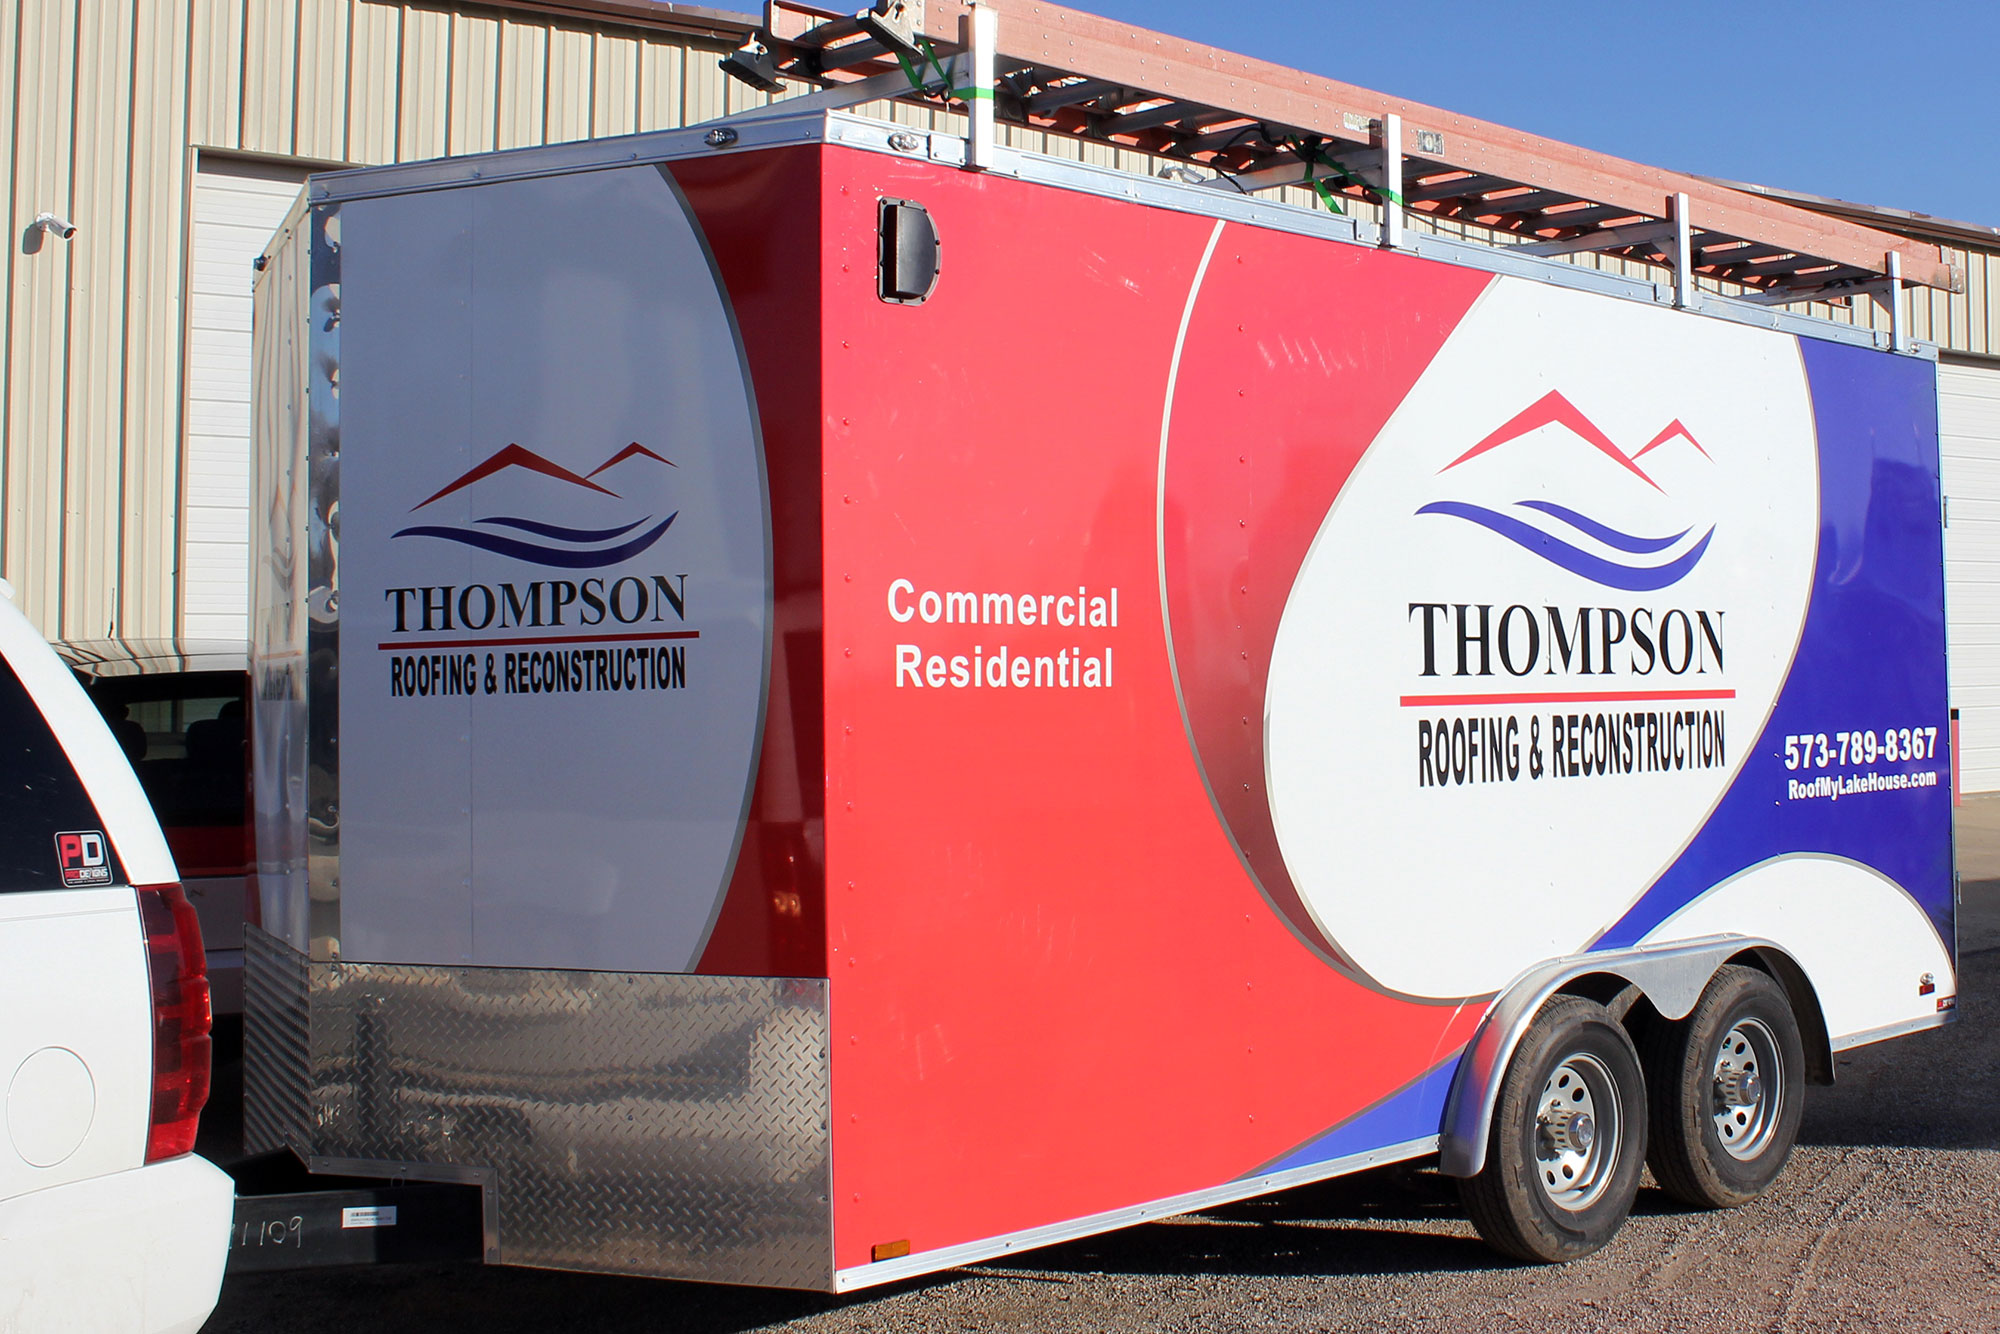 Thompson Roofing And Reconstruction Cargo Trailers Graphics And Wraps Pro Dezigns Columbia Missouri